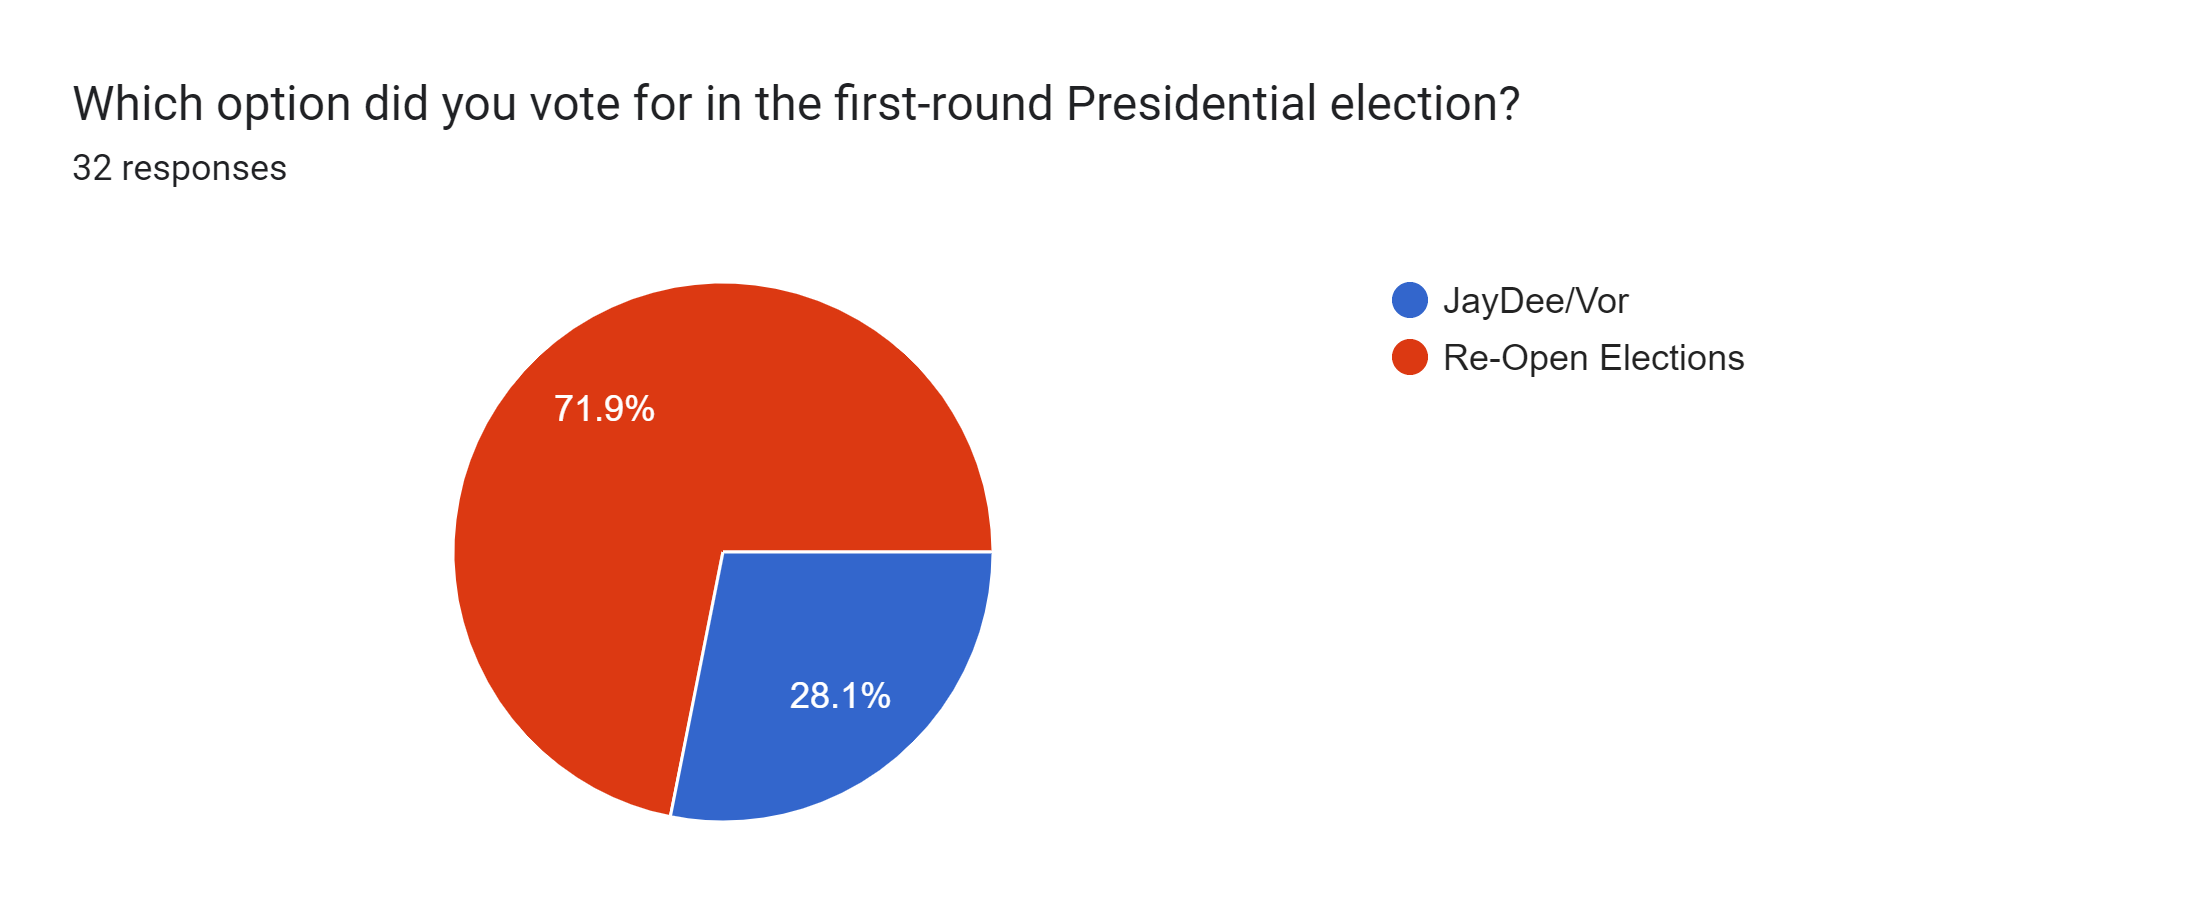 Forms response chart. Question title: Which option did you vote for in the first-round Presidential election?. Number of responses: 32 responses.